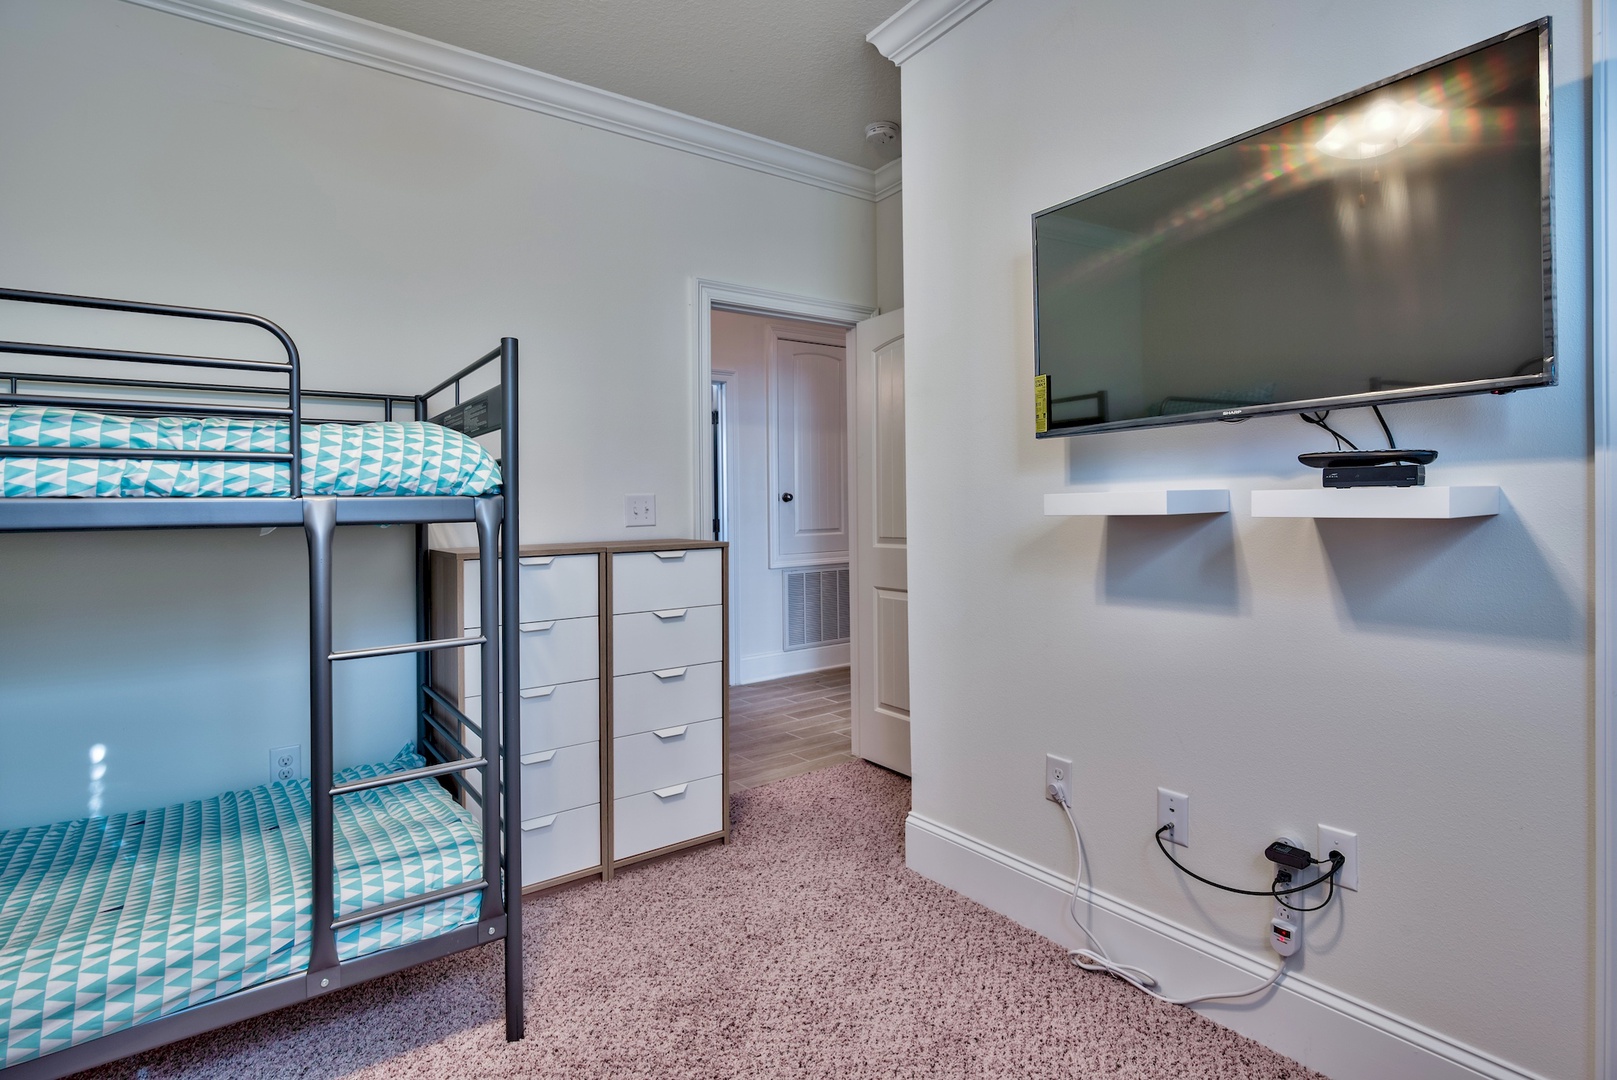 The bunk room offers 4 twin beds and one trundle twin!